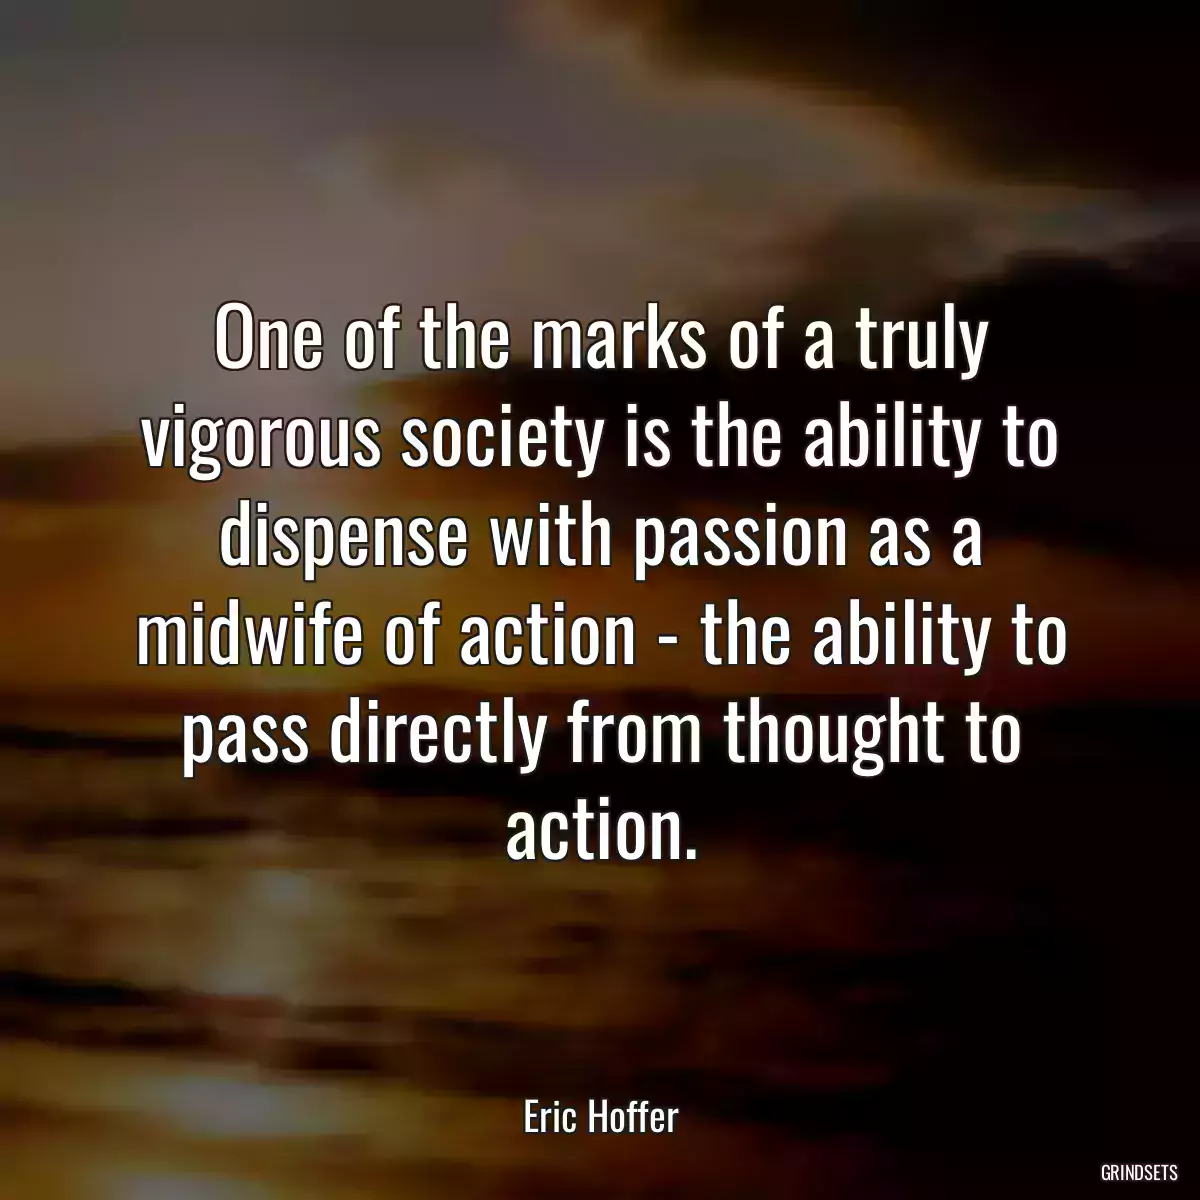 One of the marks of a truly vigorous society is the ability to dispense with passion as a midwife of action - the ability to pass directly from thought to action.